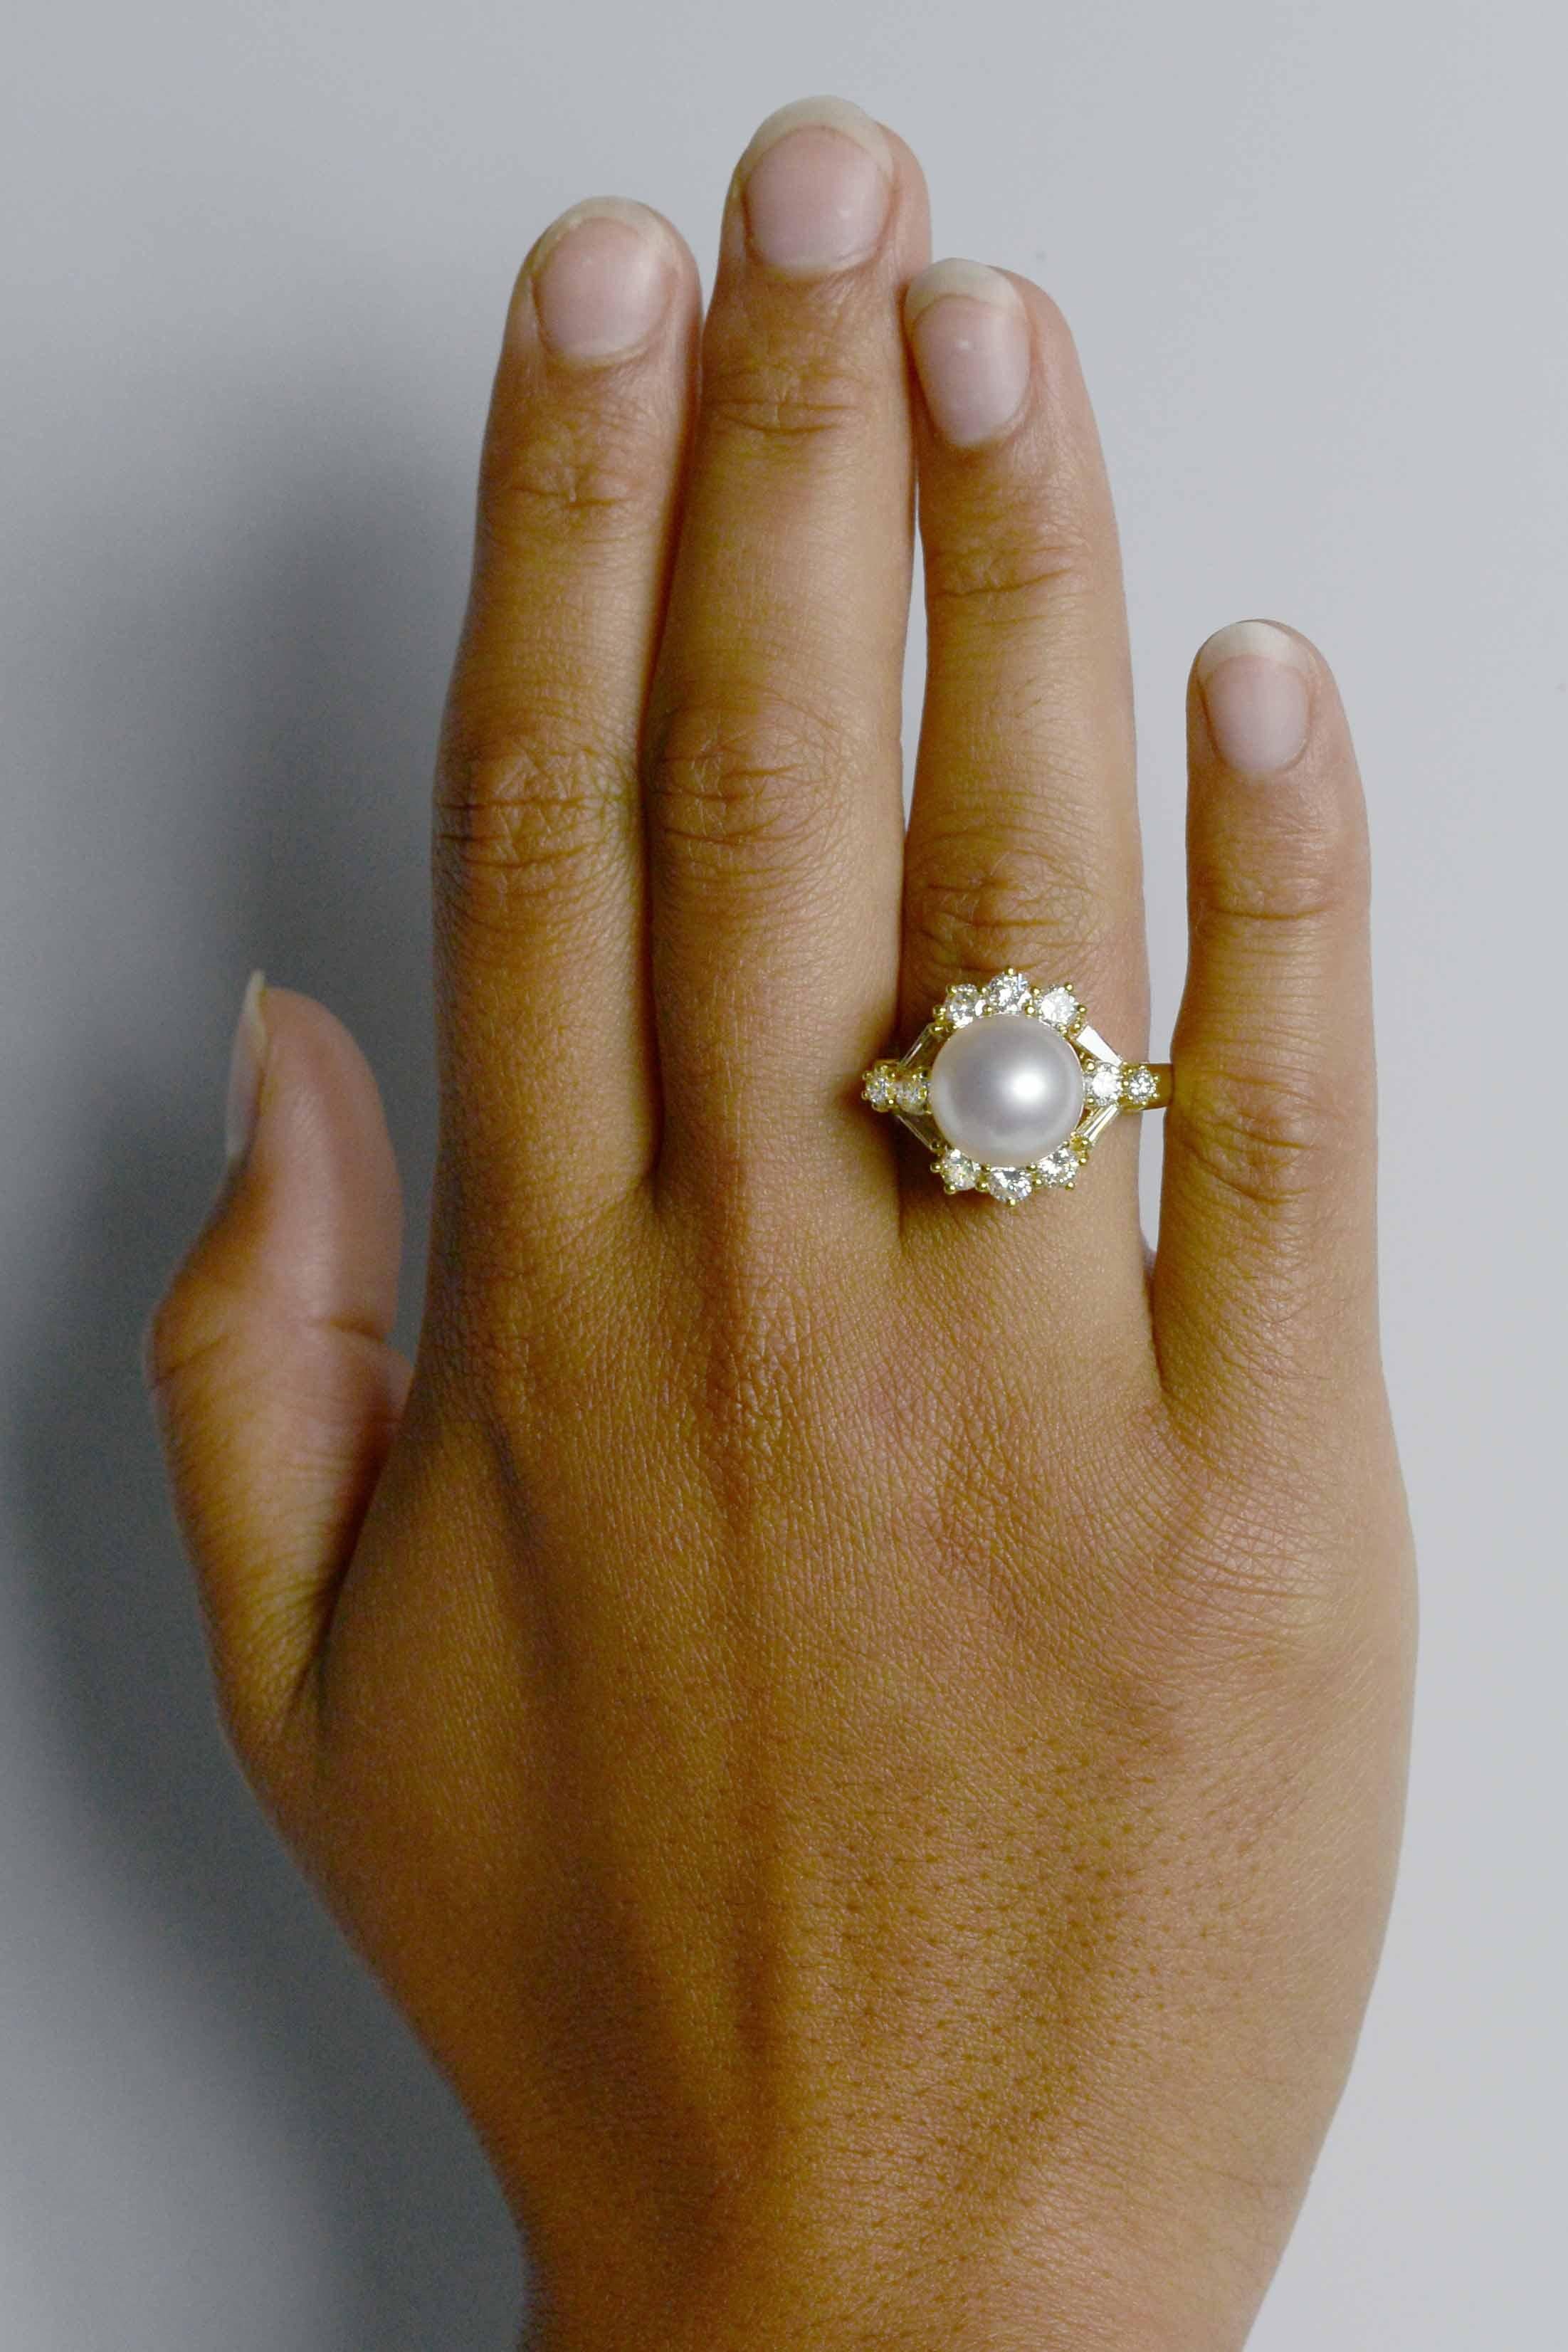 This amazing white South Sea pearl and diamond cocktail ring is centered by a huge, 11.4 mm perfectly round glowing dome of high luster with a mesmerizing rose overtone. The flawless complexion mirrors the fire of the 14 diamonds arranged in